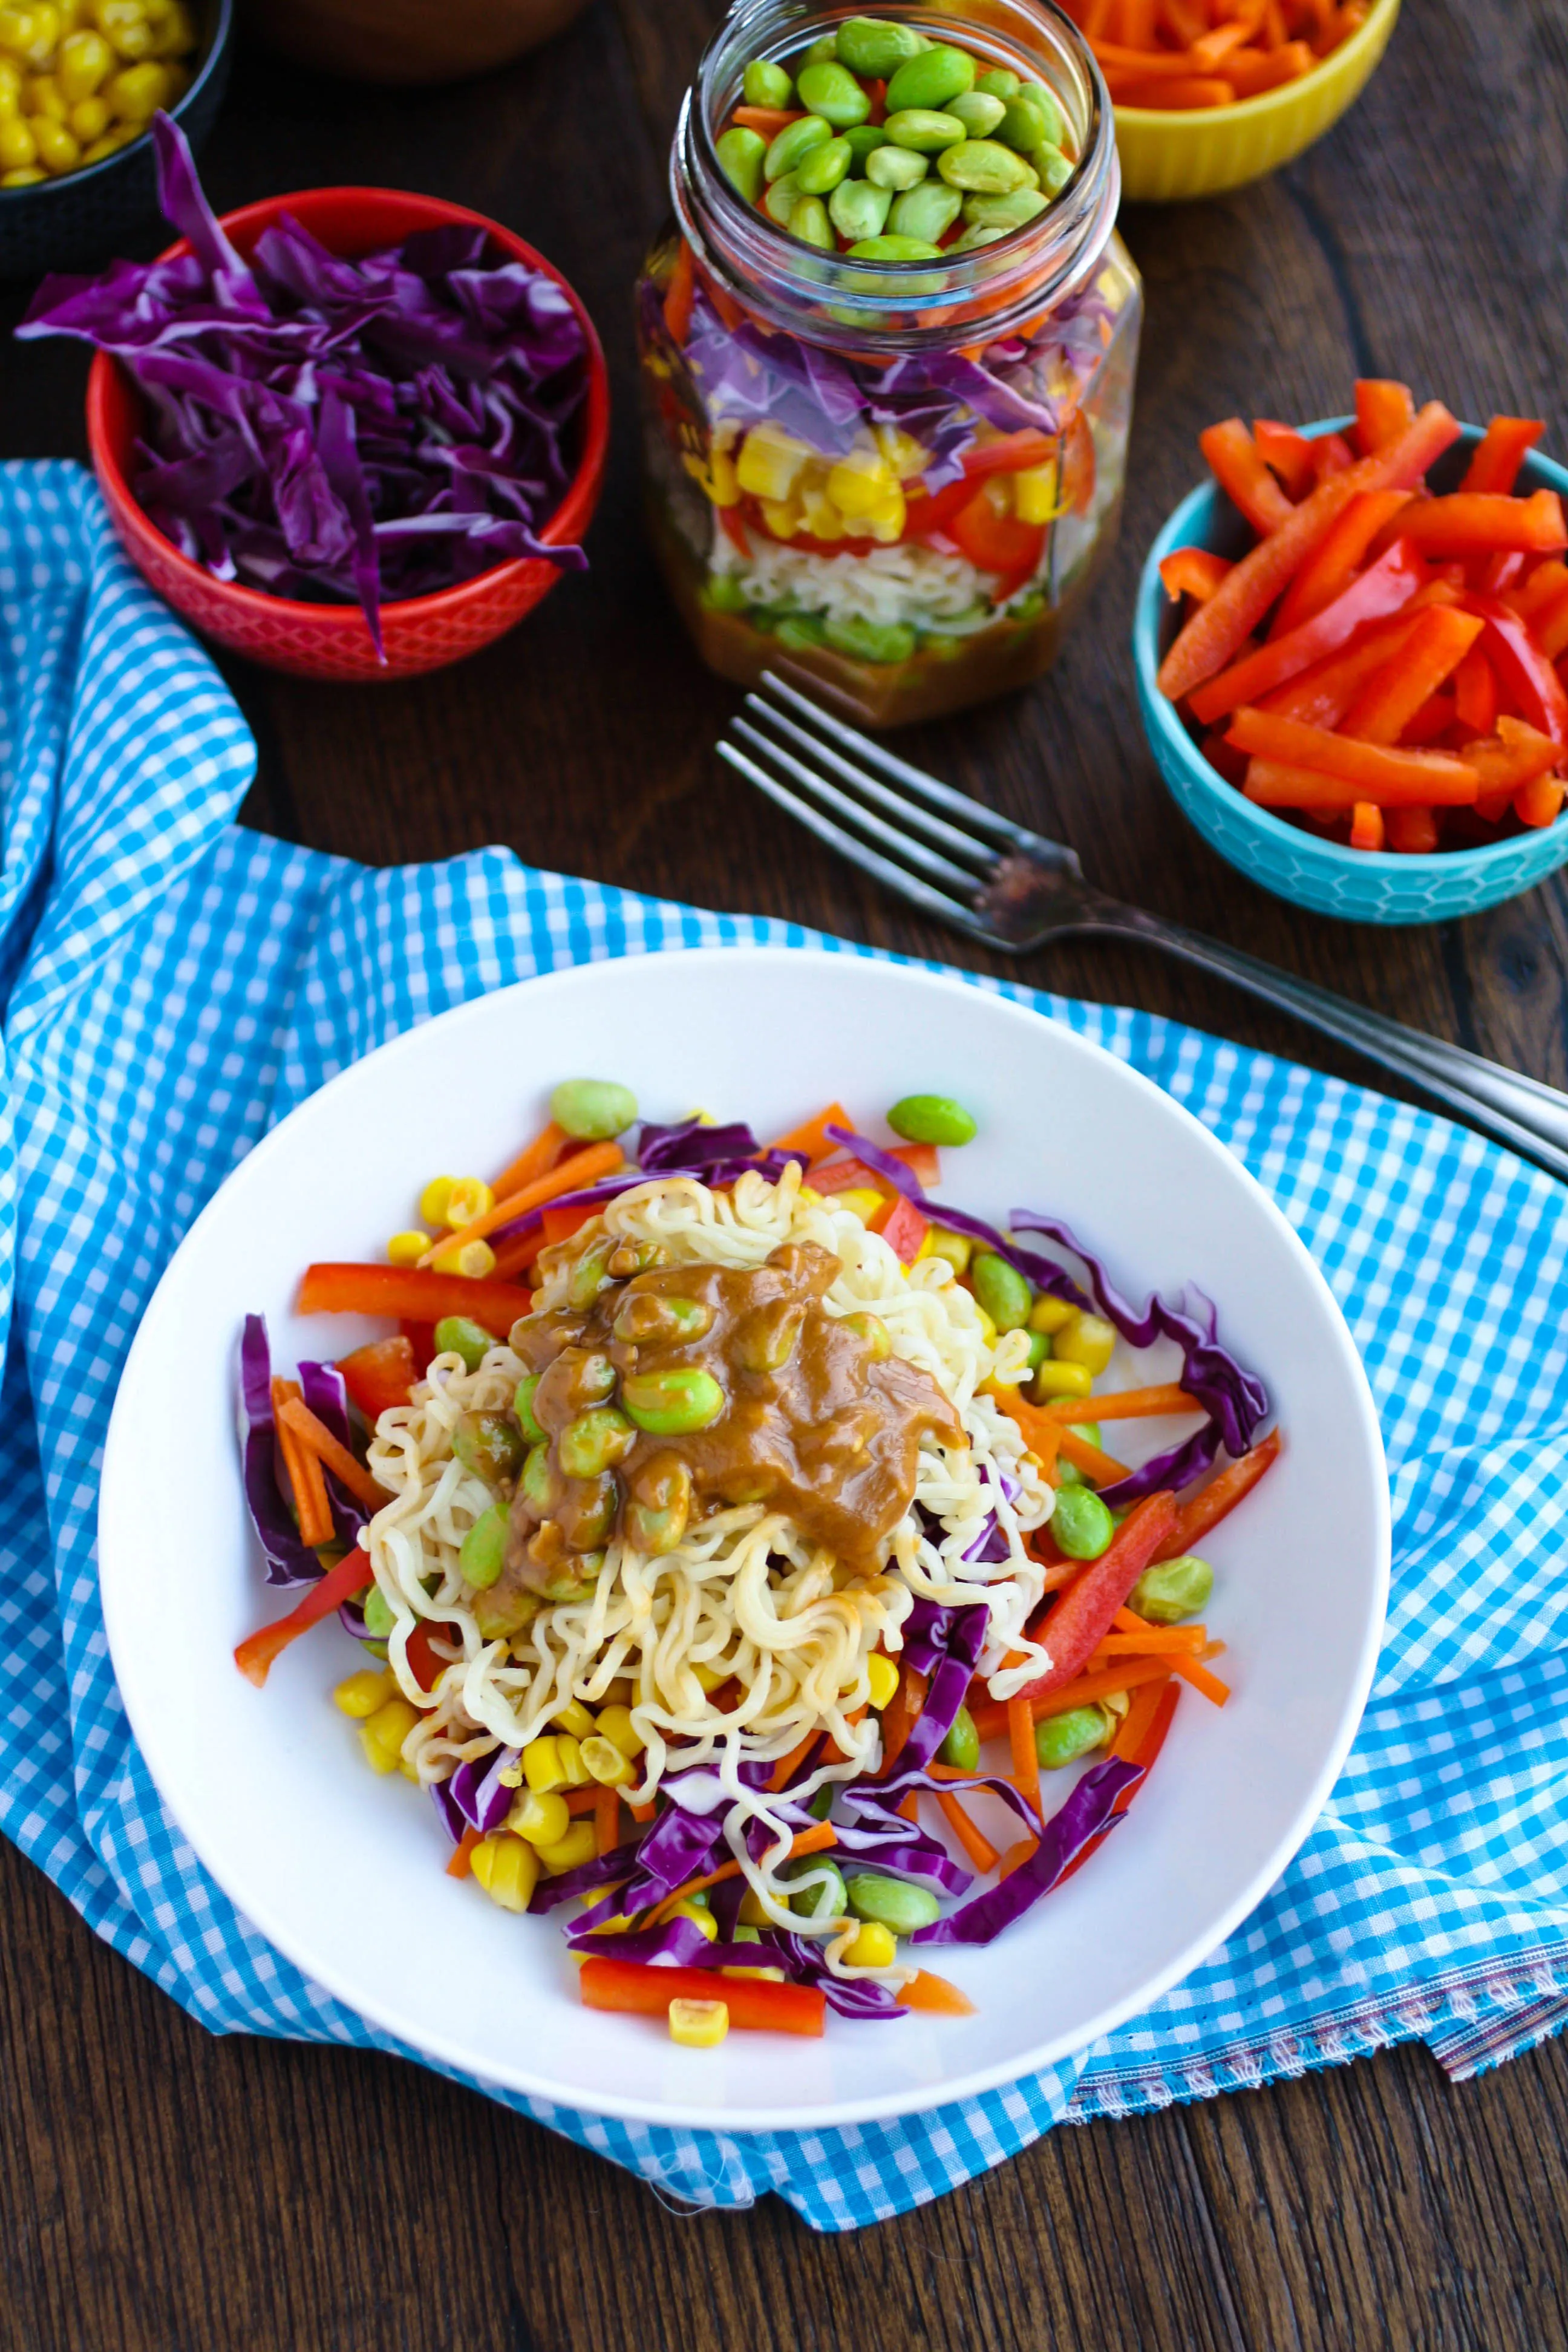 Asian Noodle Salad in a Jar with Spicy Peanut Dressing is a convenient way to pack a salad. You'll love the colors, the crunch, and the delicious dressing.